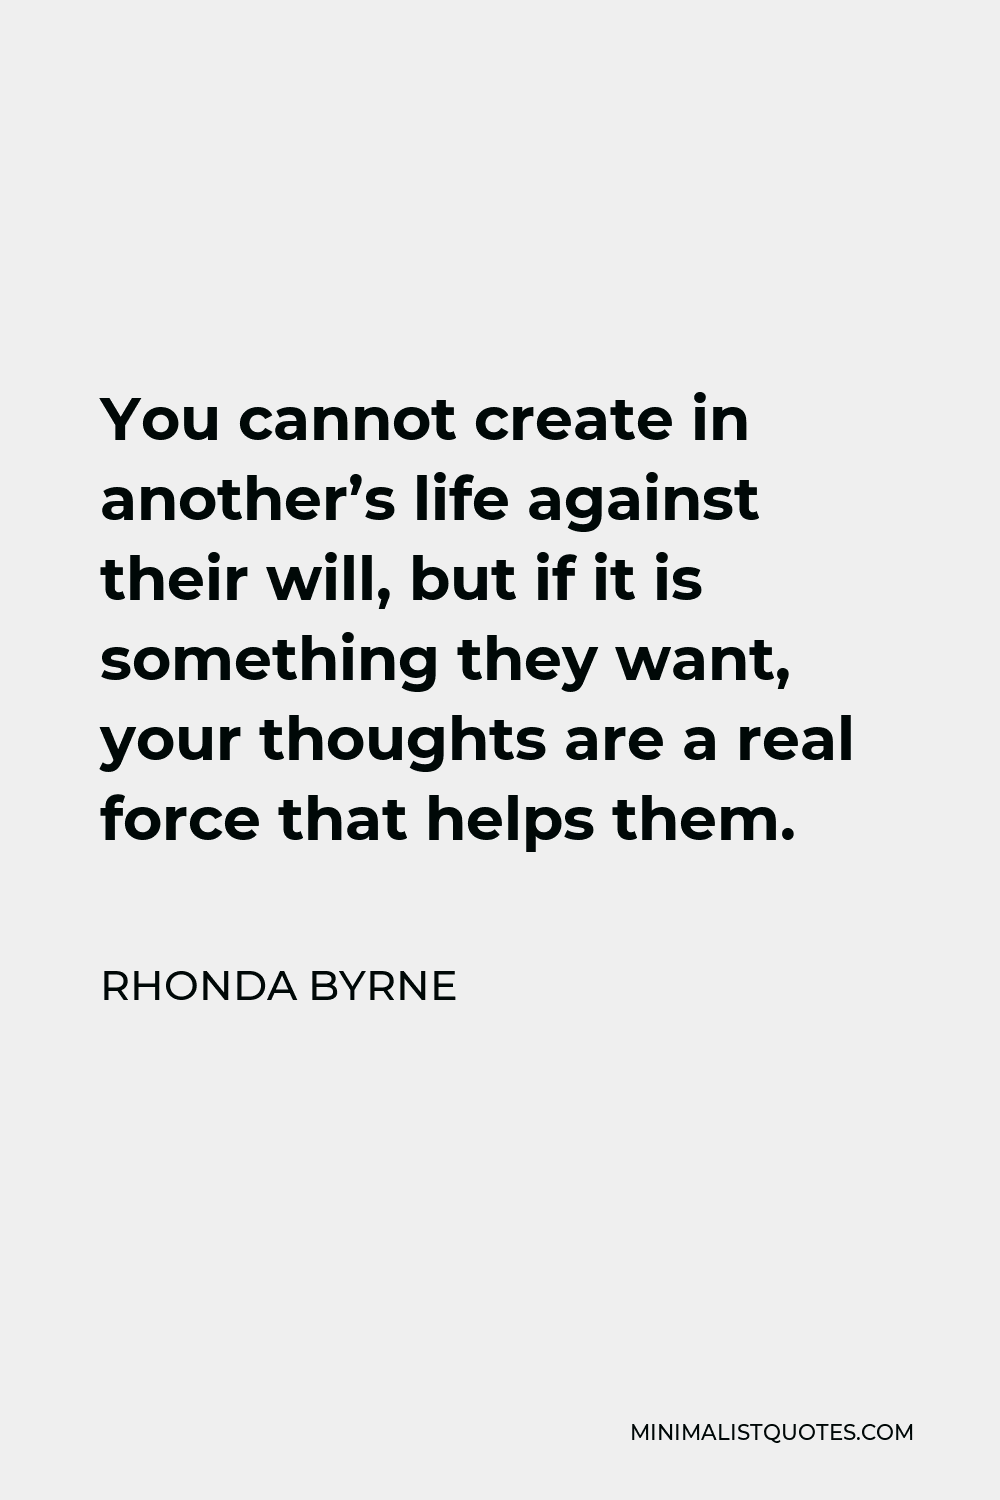 Rhonda Byrne Quote - You cannot create in another’s life against their will, but if it is something they want, your thoughts are a real force that helps them.